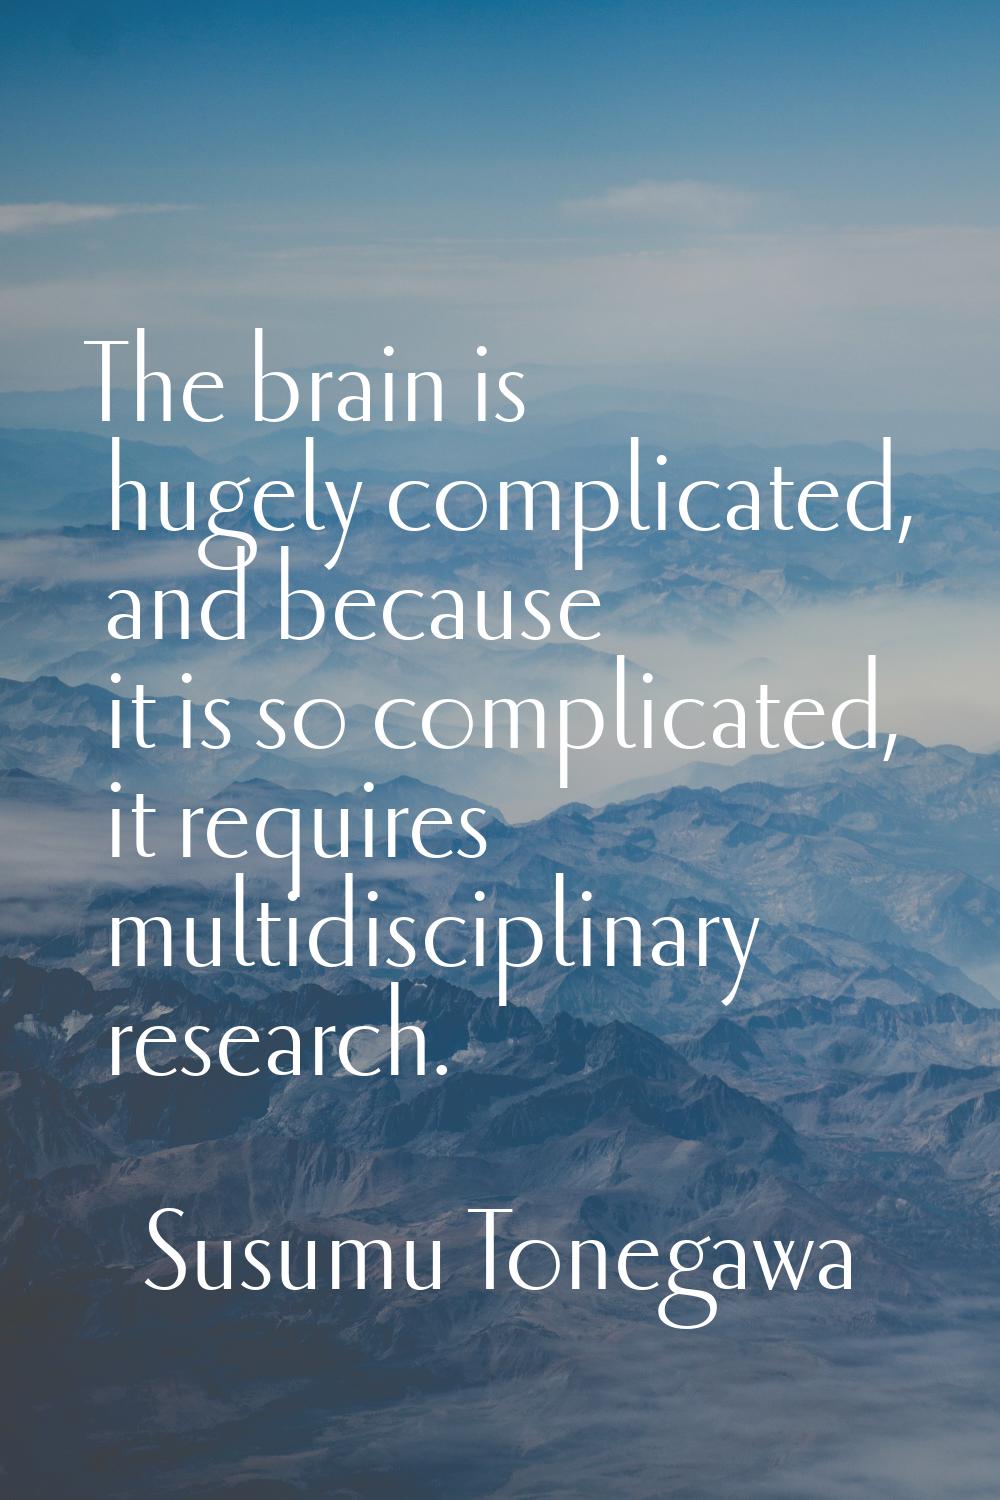 The brain is hugely complicated, and because it is so complicated, it requires multidisciplinary re